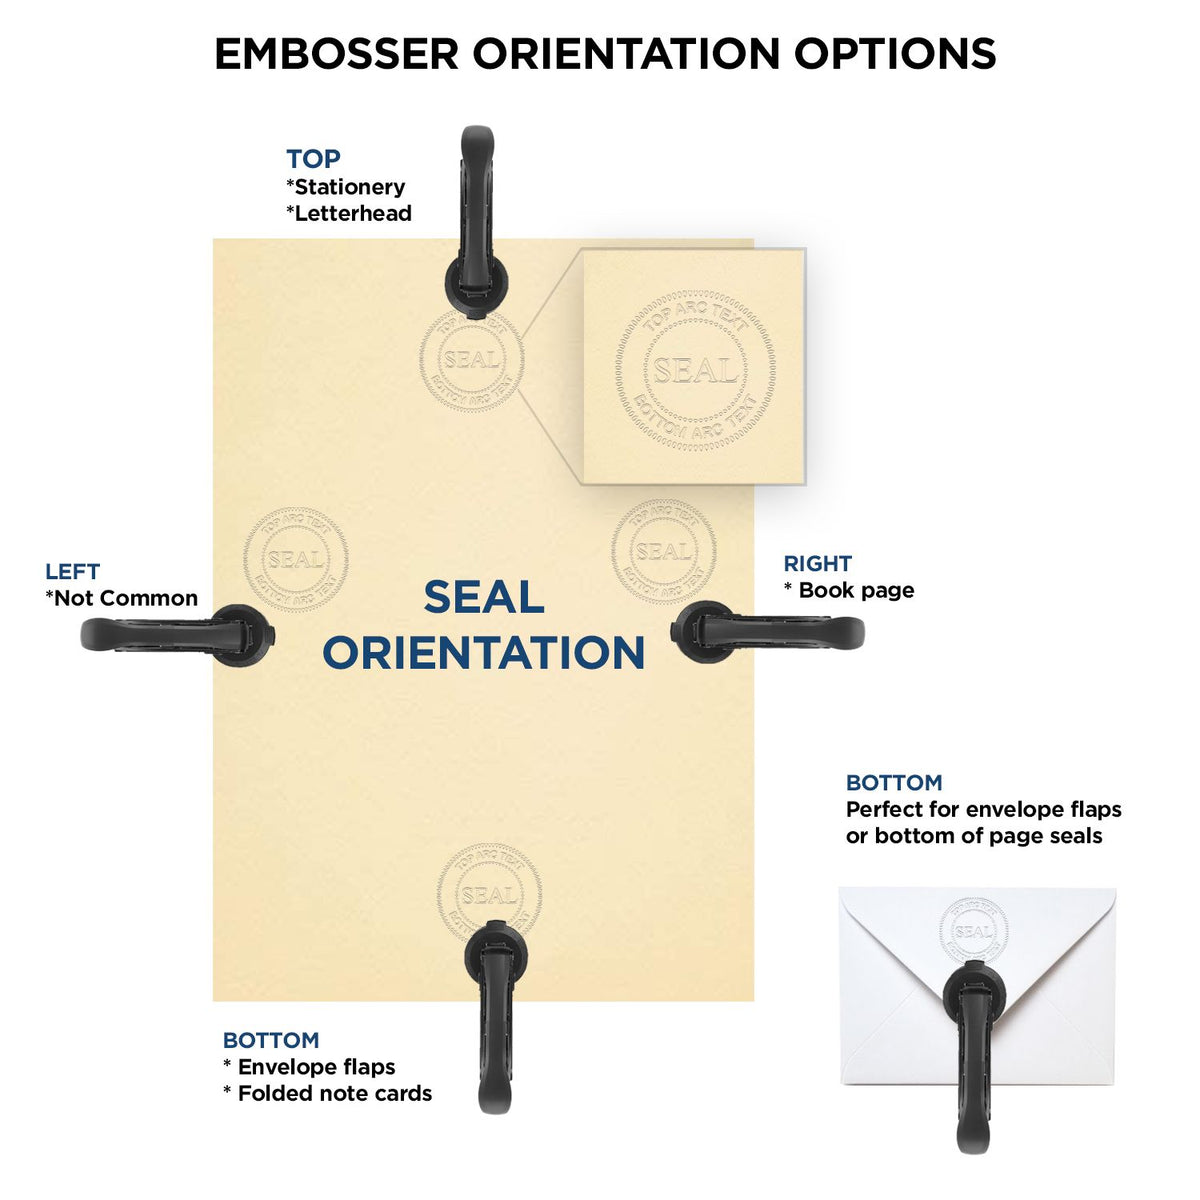 An infographic for the Gift New York Engineer Seal showing embosser orientation, this is showing examples of a top, bottom, right and left insert.